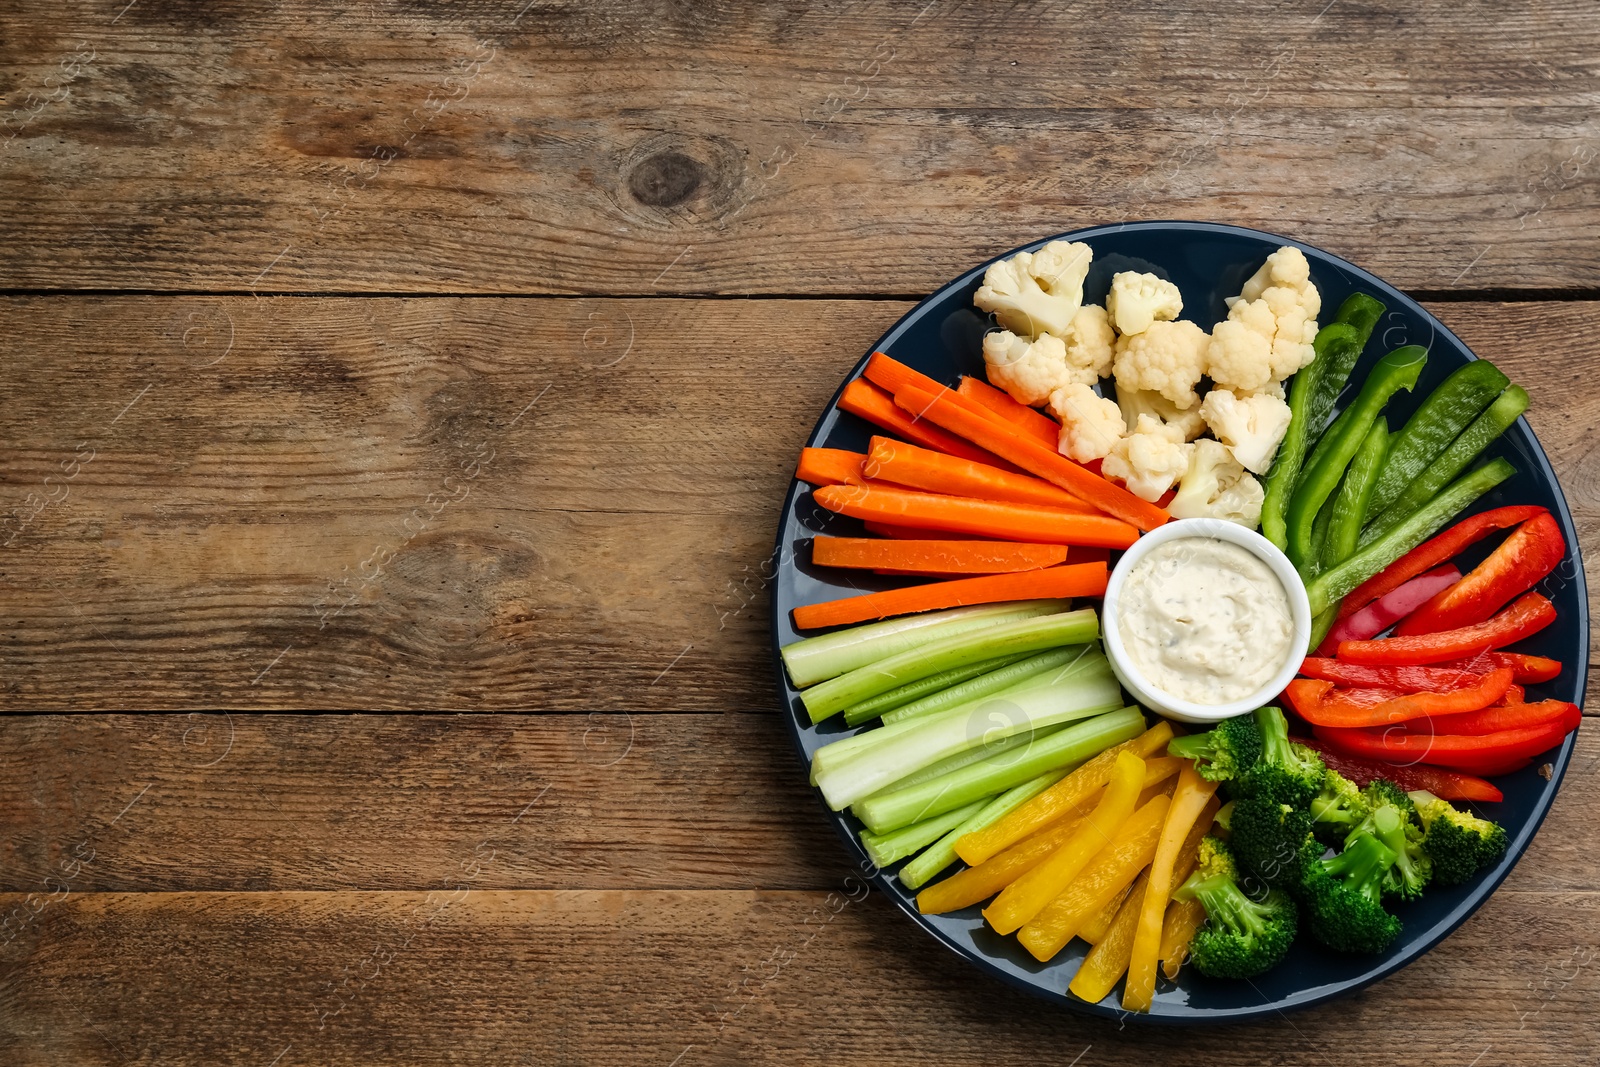 Photo of Plate with celery sticks, other vegetables and dip sauce on wooden table, top view. Space for text